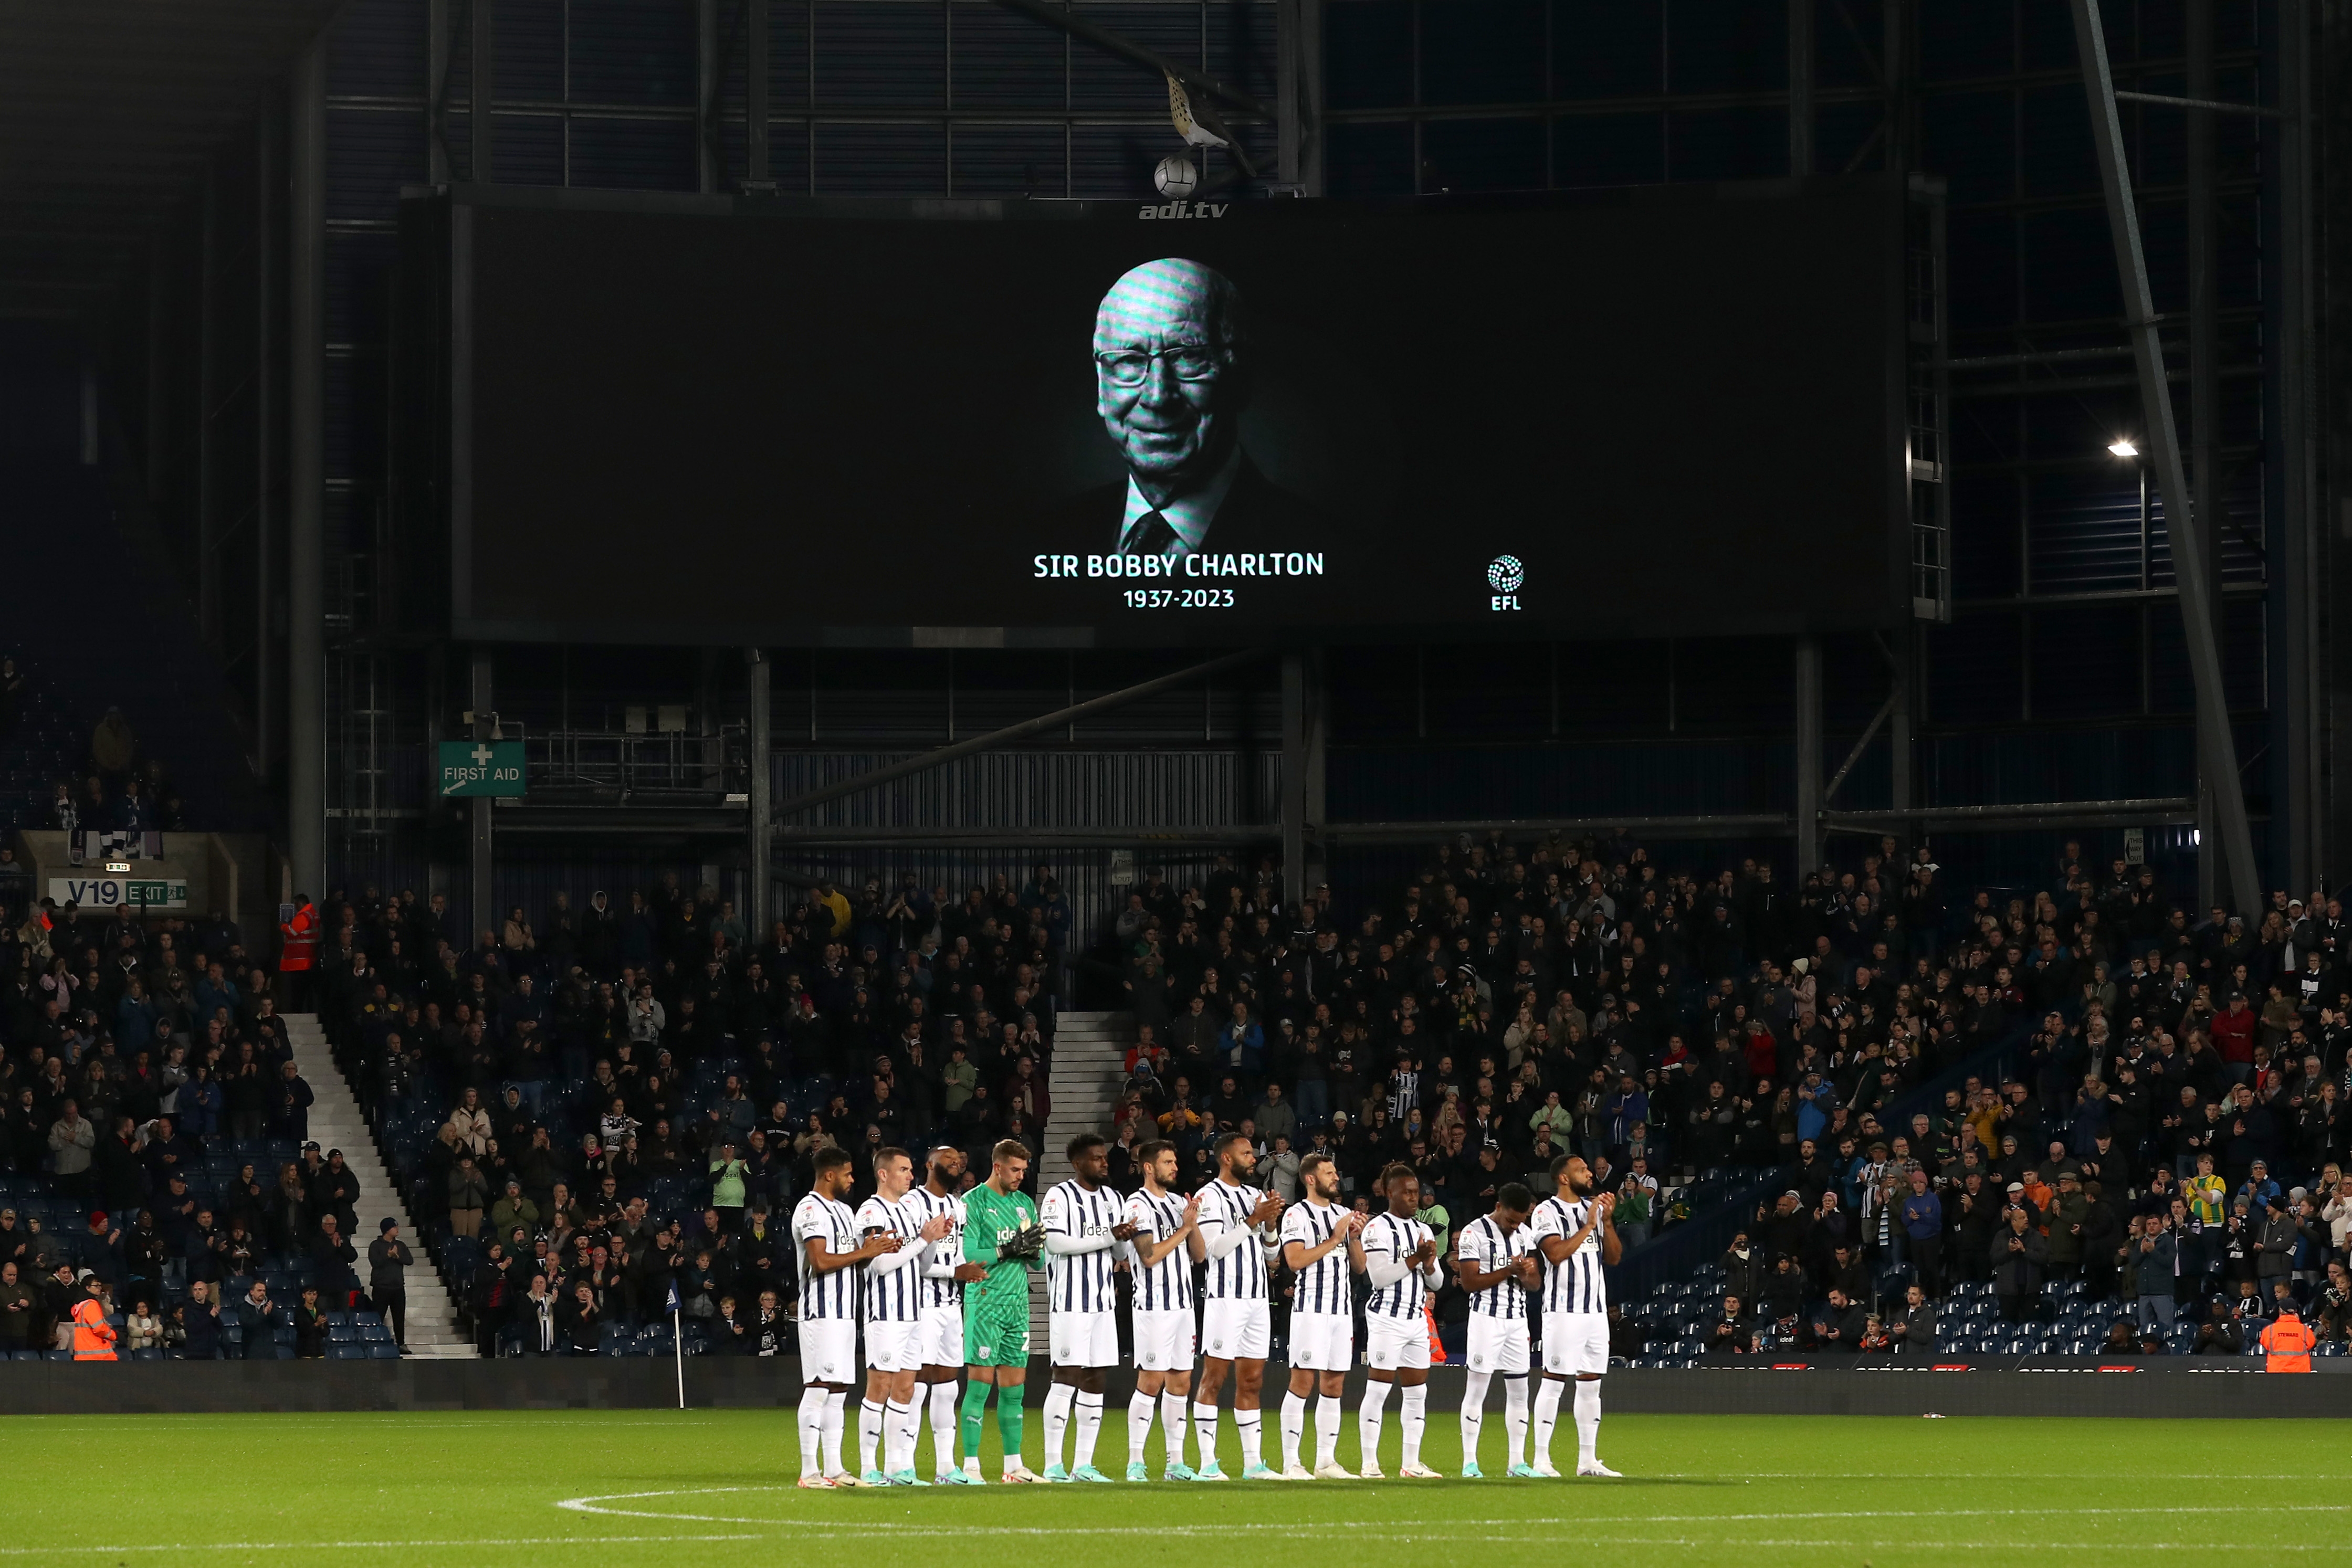 Albion players on the centre circle in a line with an image displayed of Sir Bobby Charlton behind them on the big screen